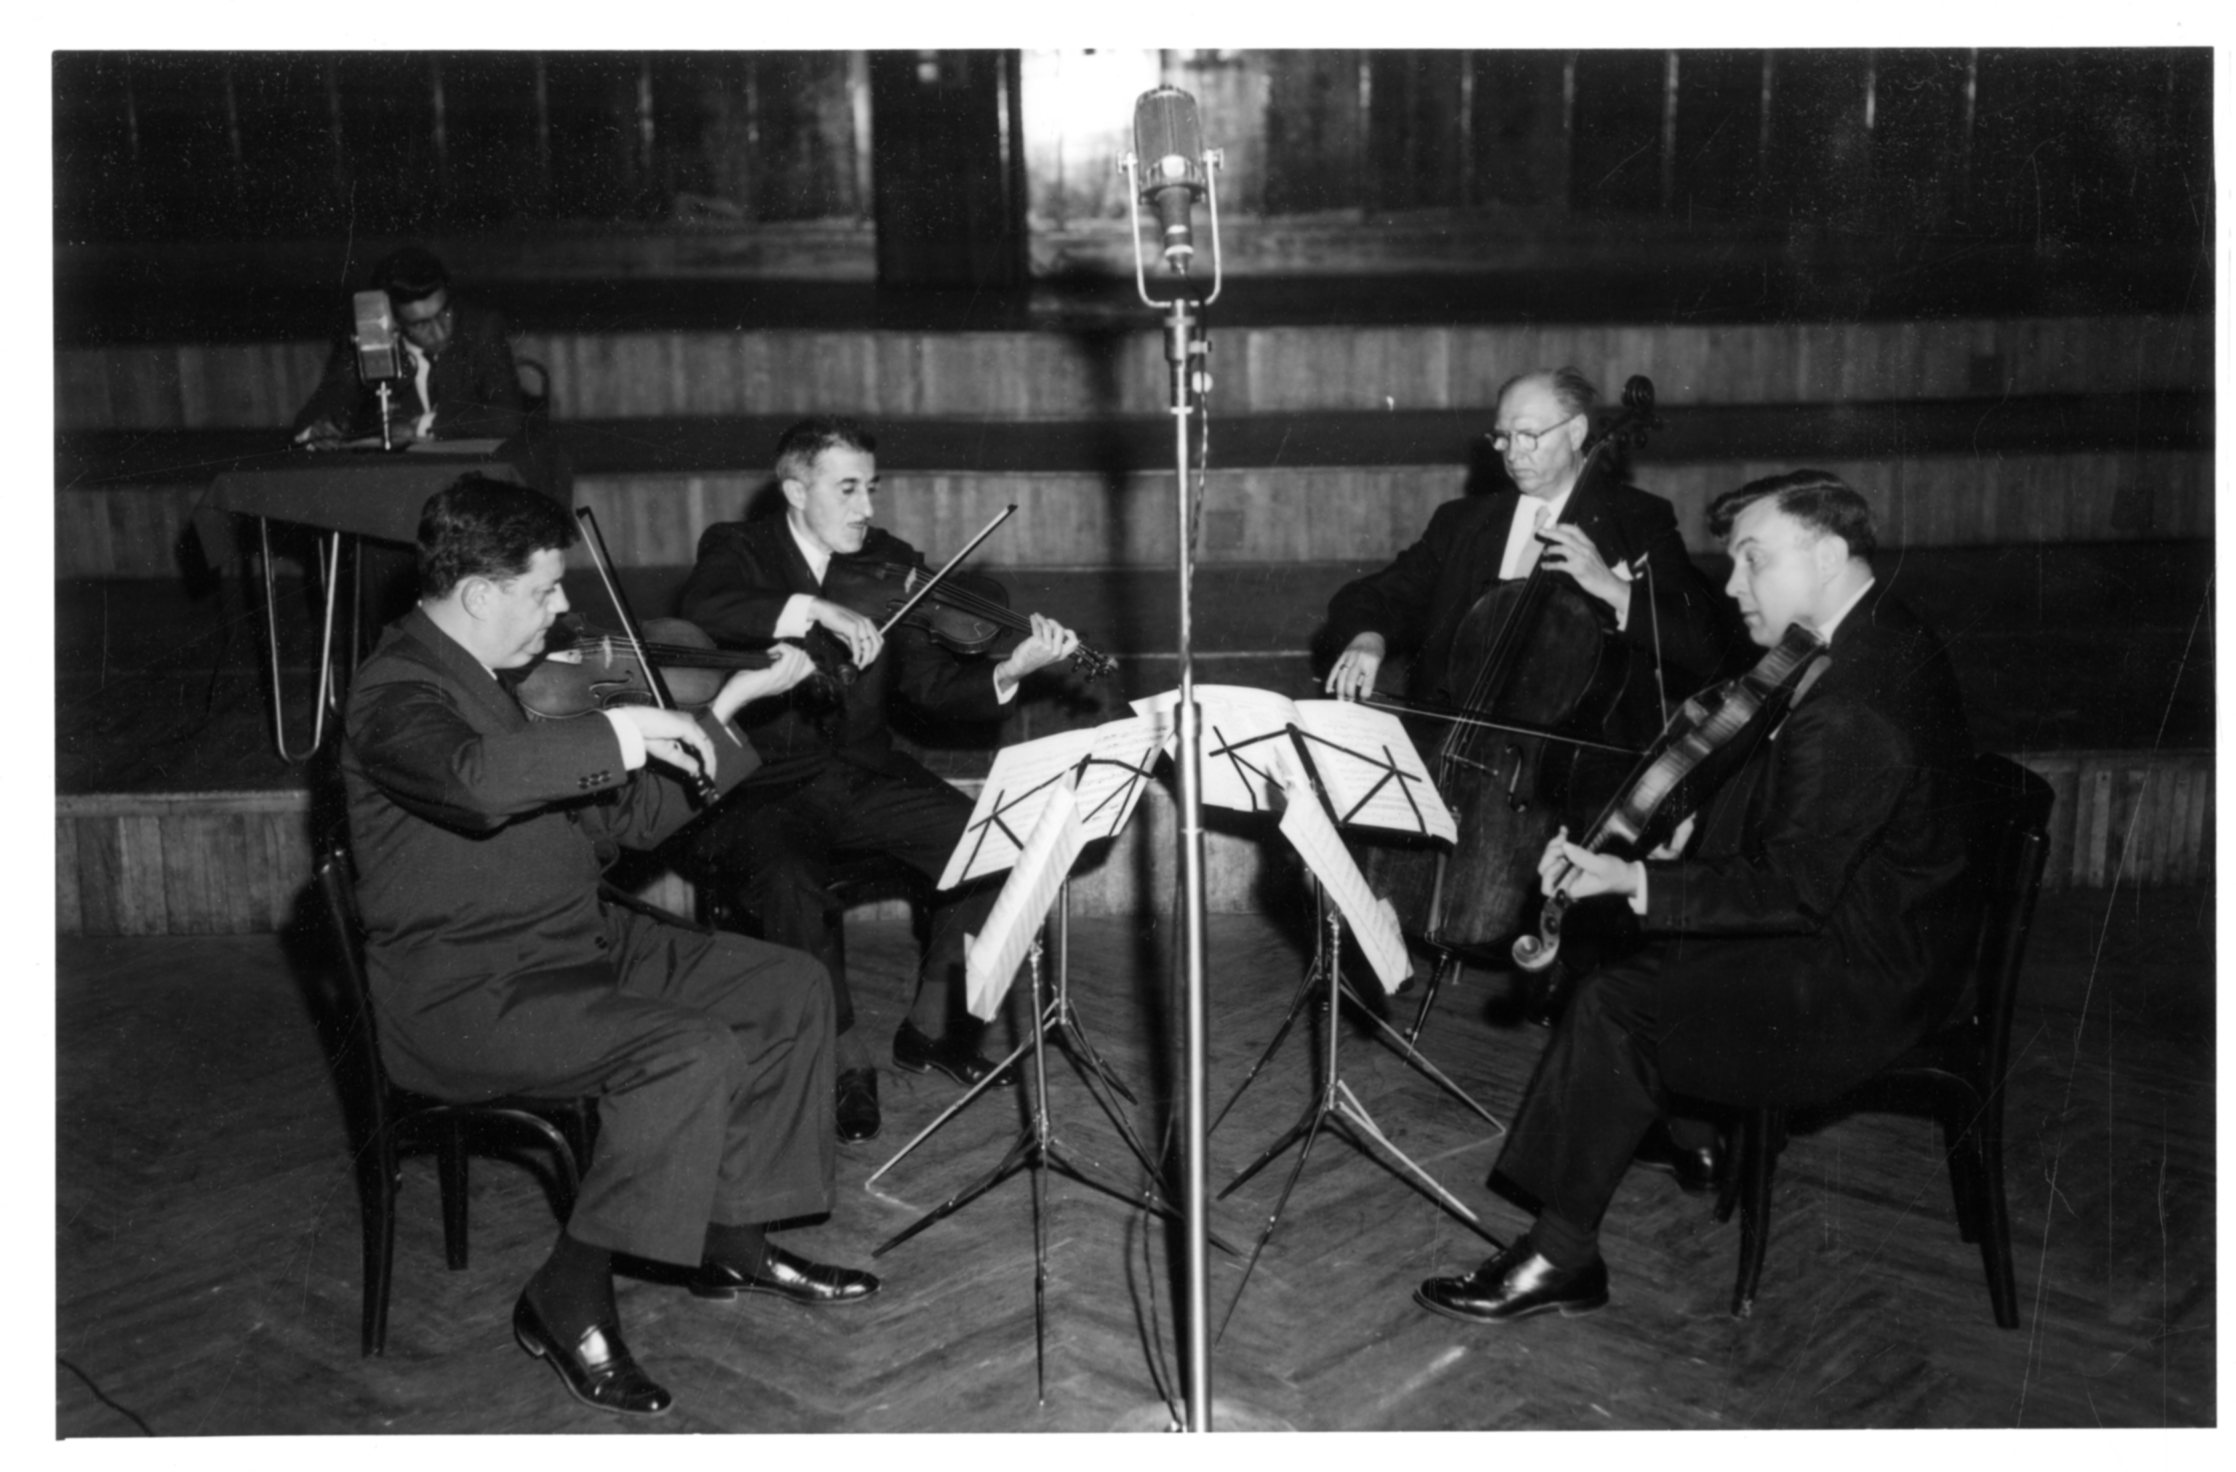 The Eastman String Quartet performing for a radio broadcast in Ankara, Turkey, April 2nd, 1960. John Celentano Collection, Sibley Music Library.